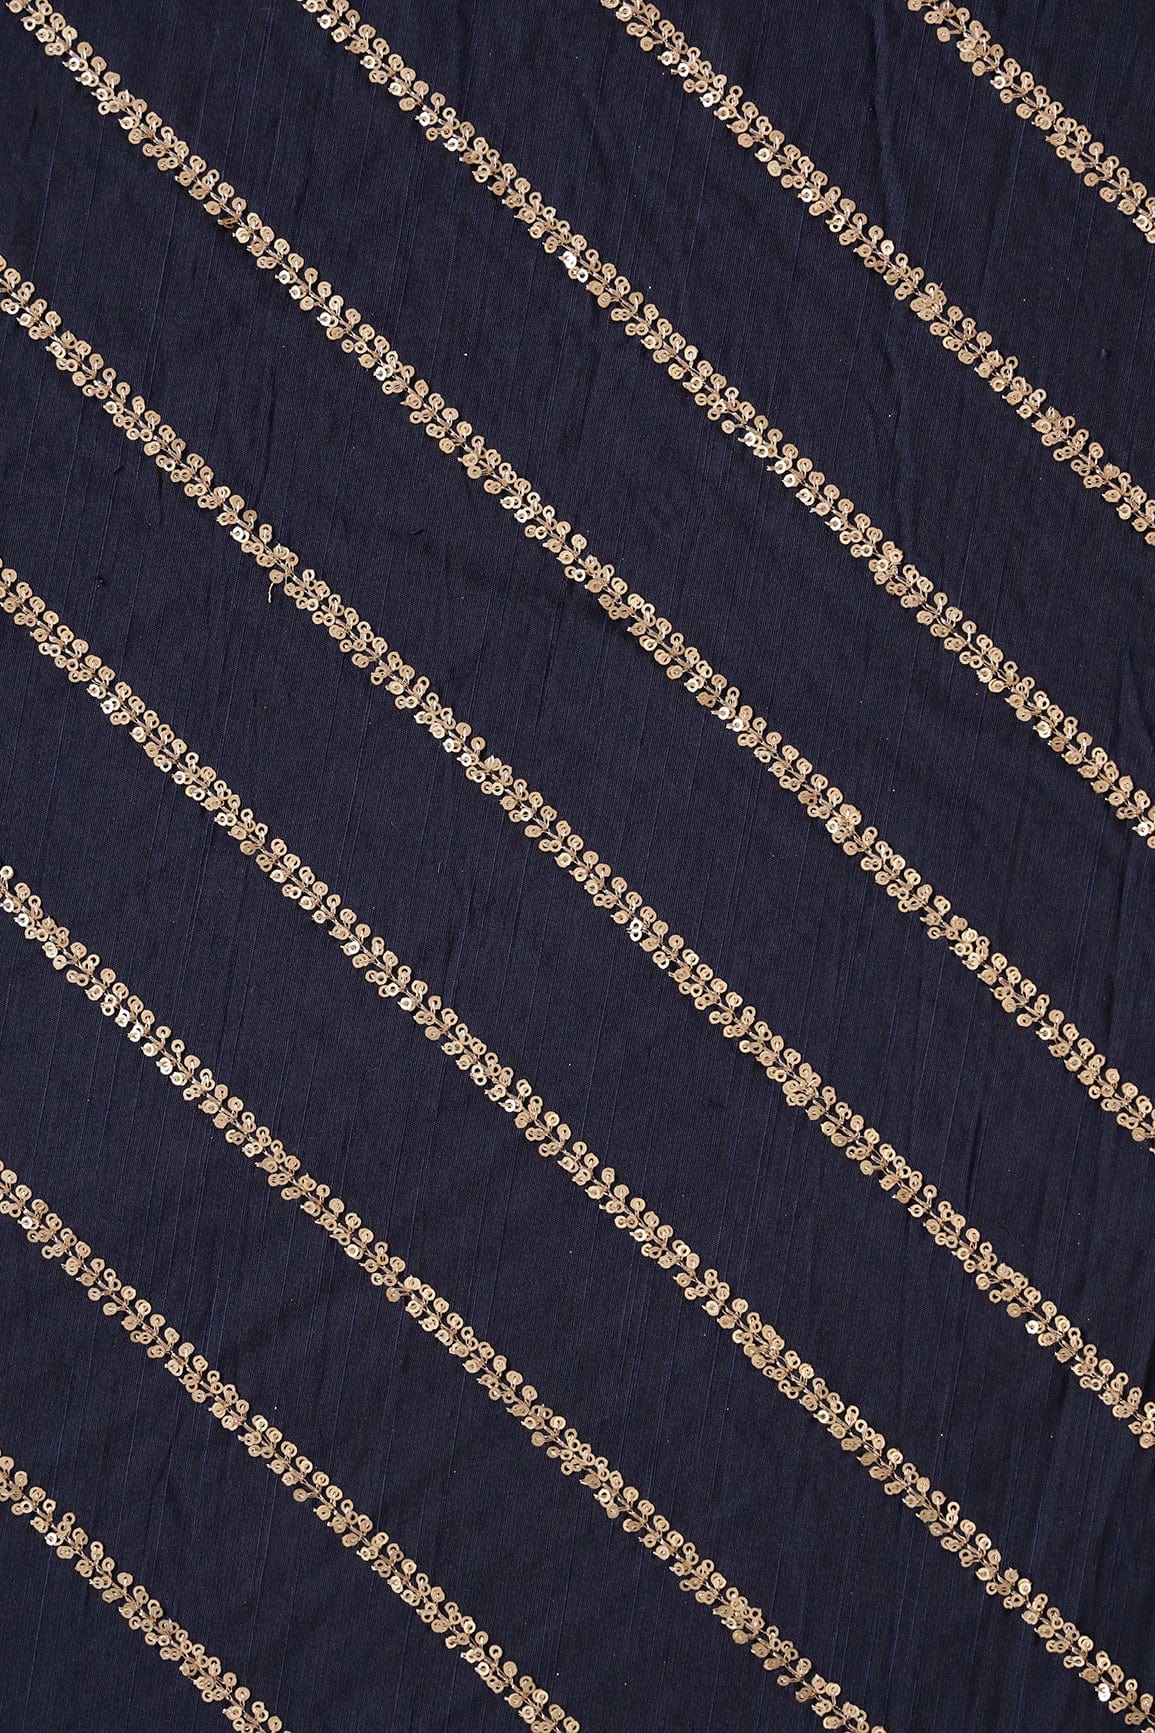 doeraa Embroidery Fabrics Gold Sequins With Gold Zari Stripes Embroidery Work On Navy Blue Raw Silk Fabric